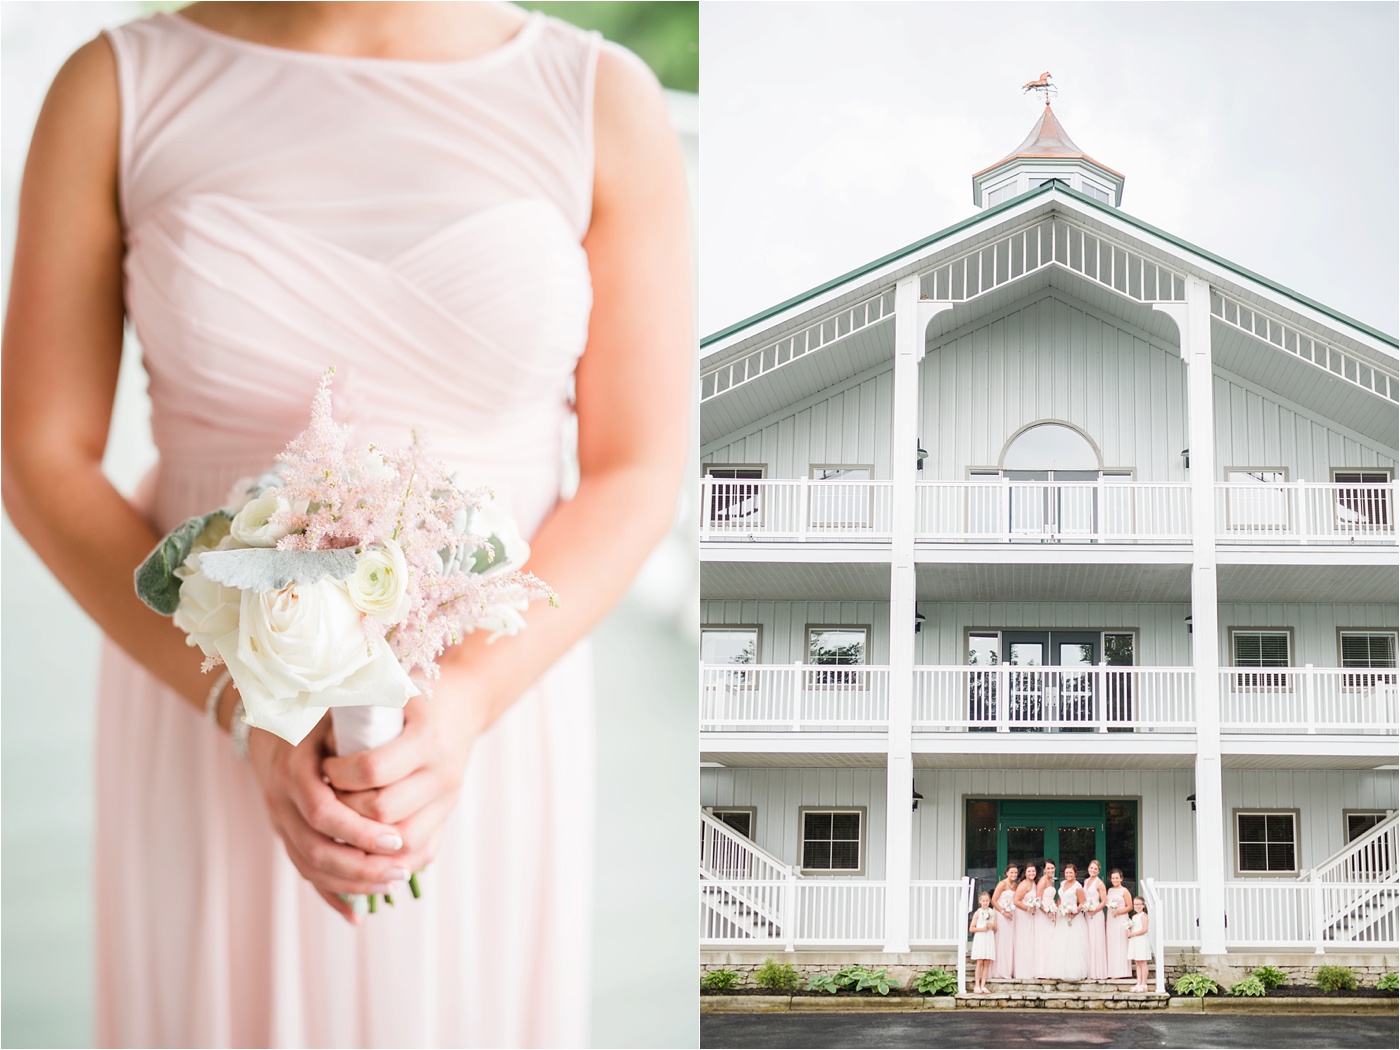 A Blush Outdoor wedding at Irongate Equestrian | KariMe Photography_0075